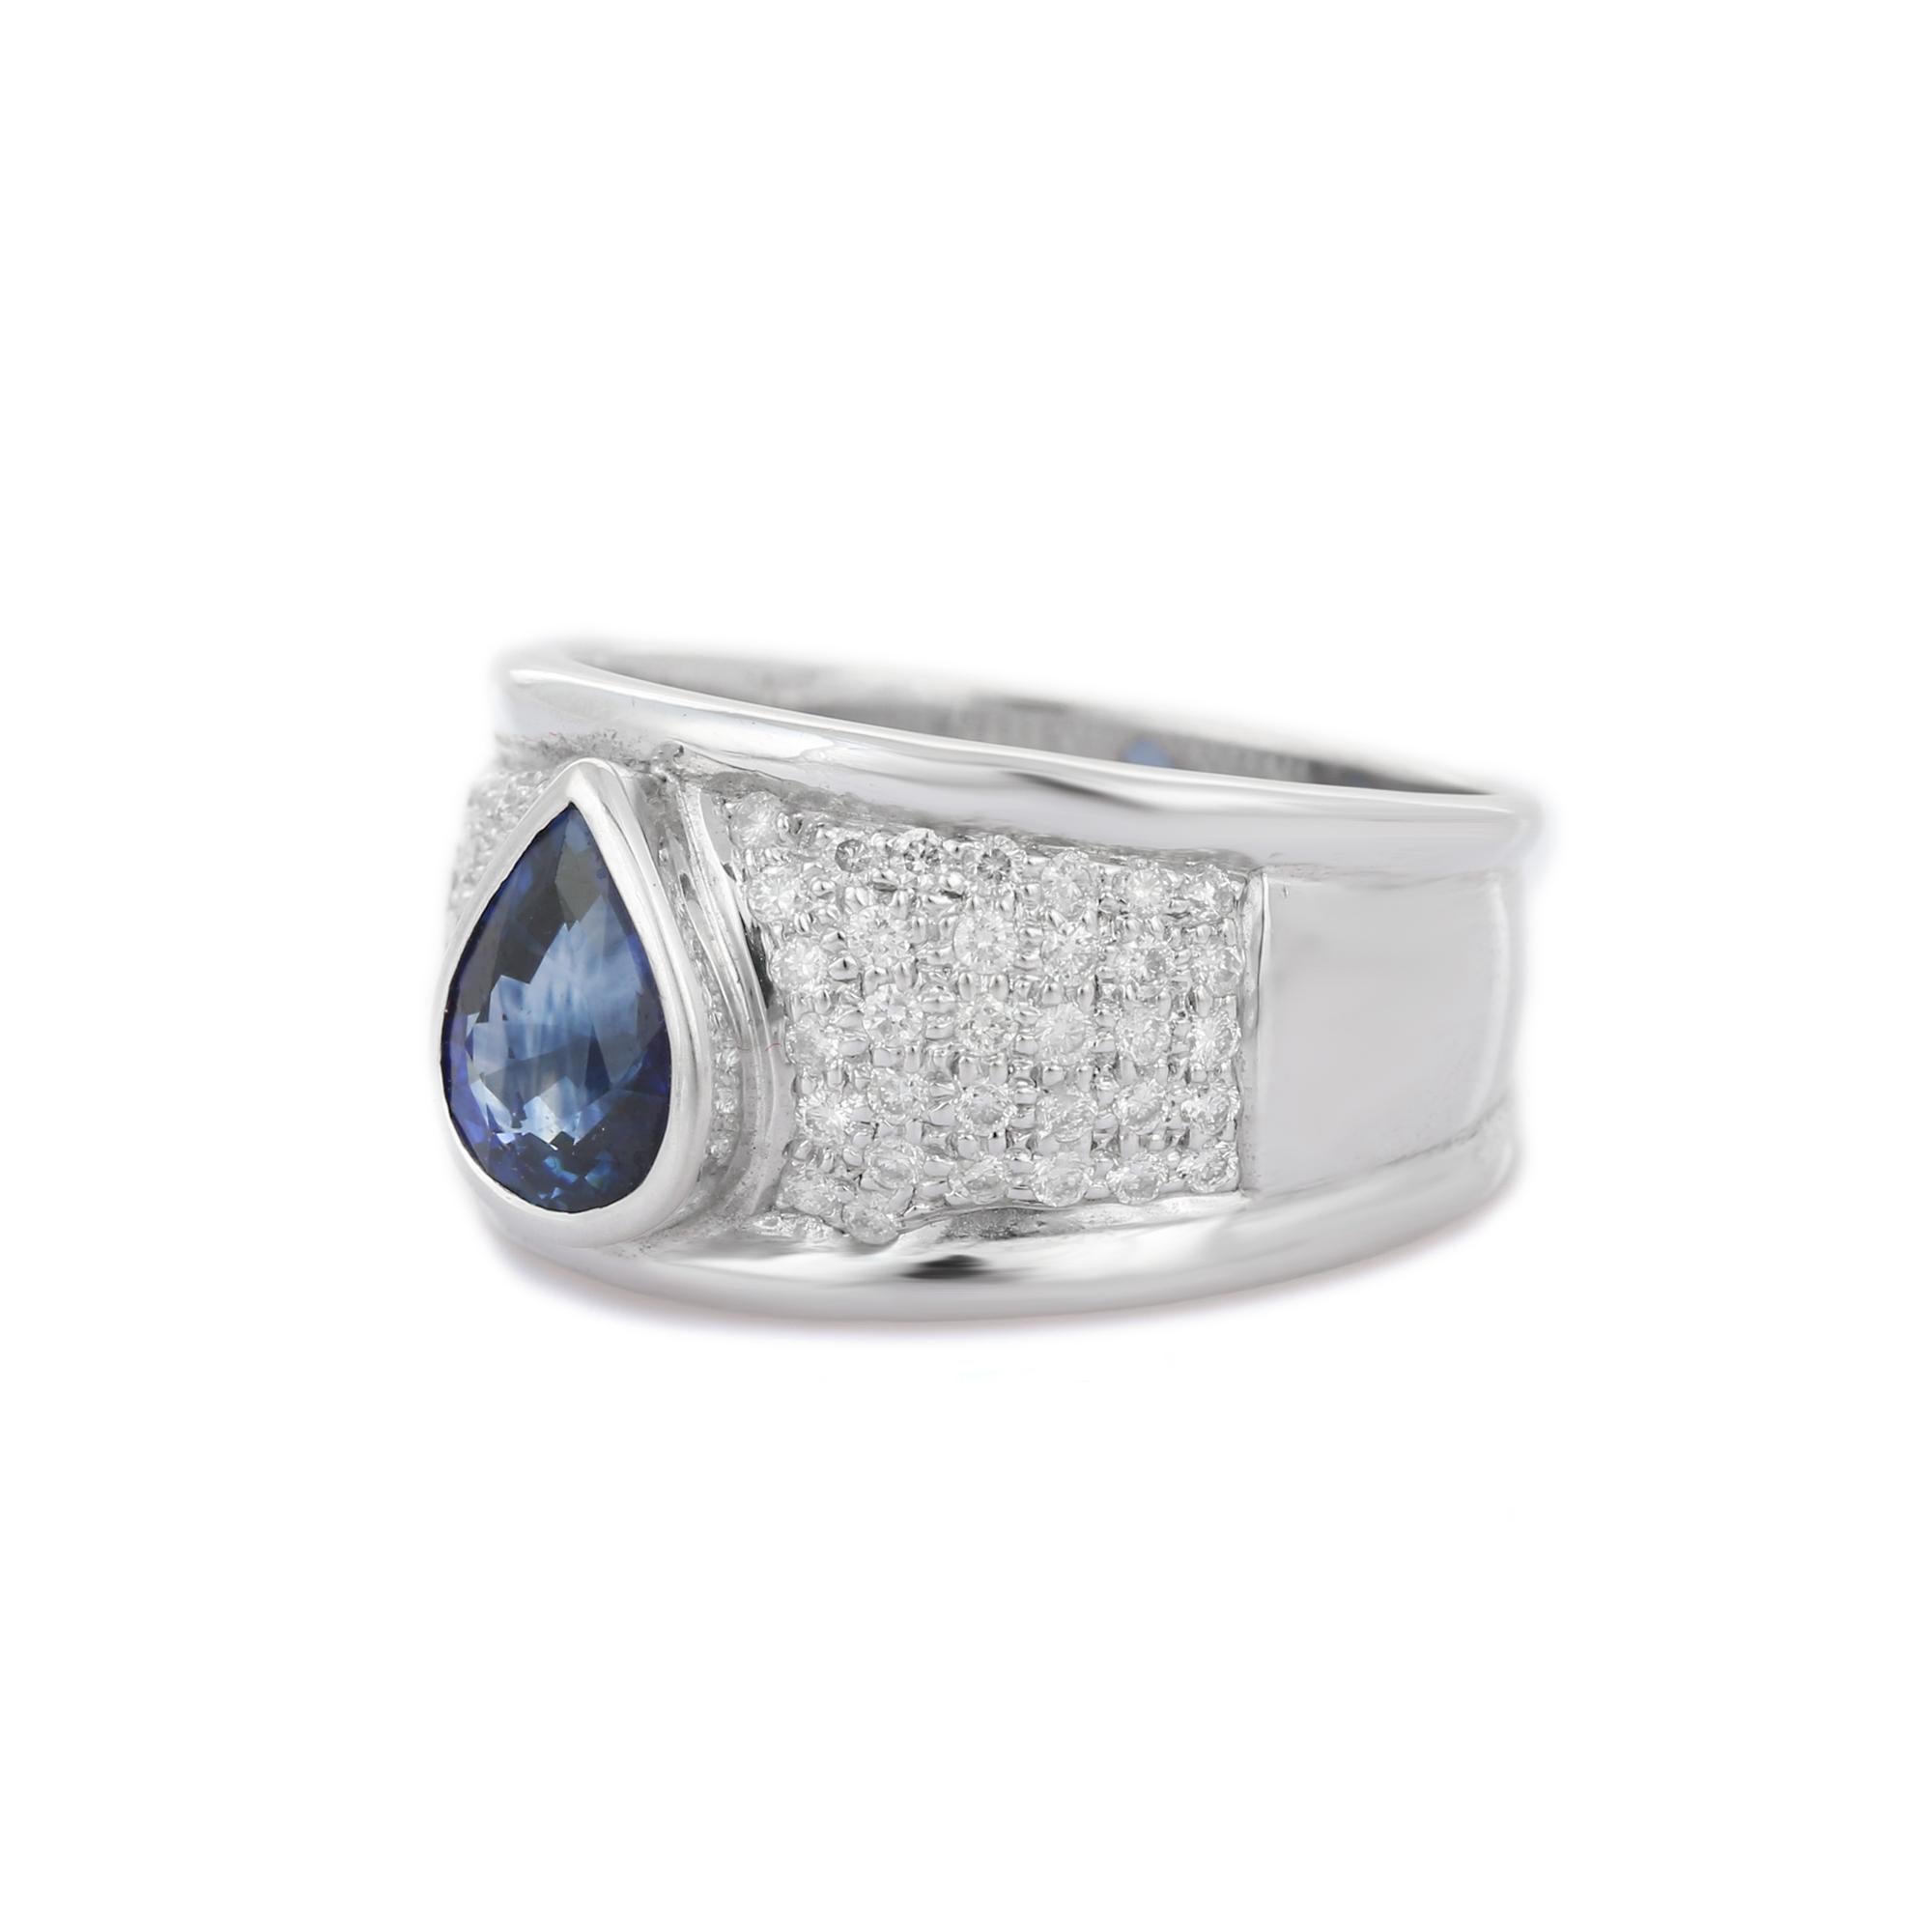 For Sale:  Glamarous 2.1 Ct Blue Sapphire Cocktail Ring in 18K White Gold with Diamonds 3